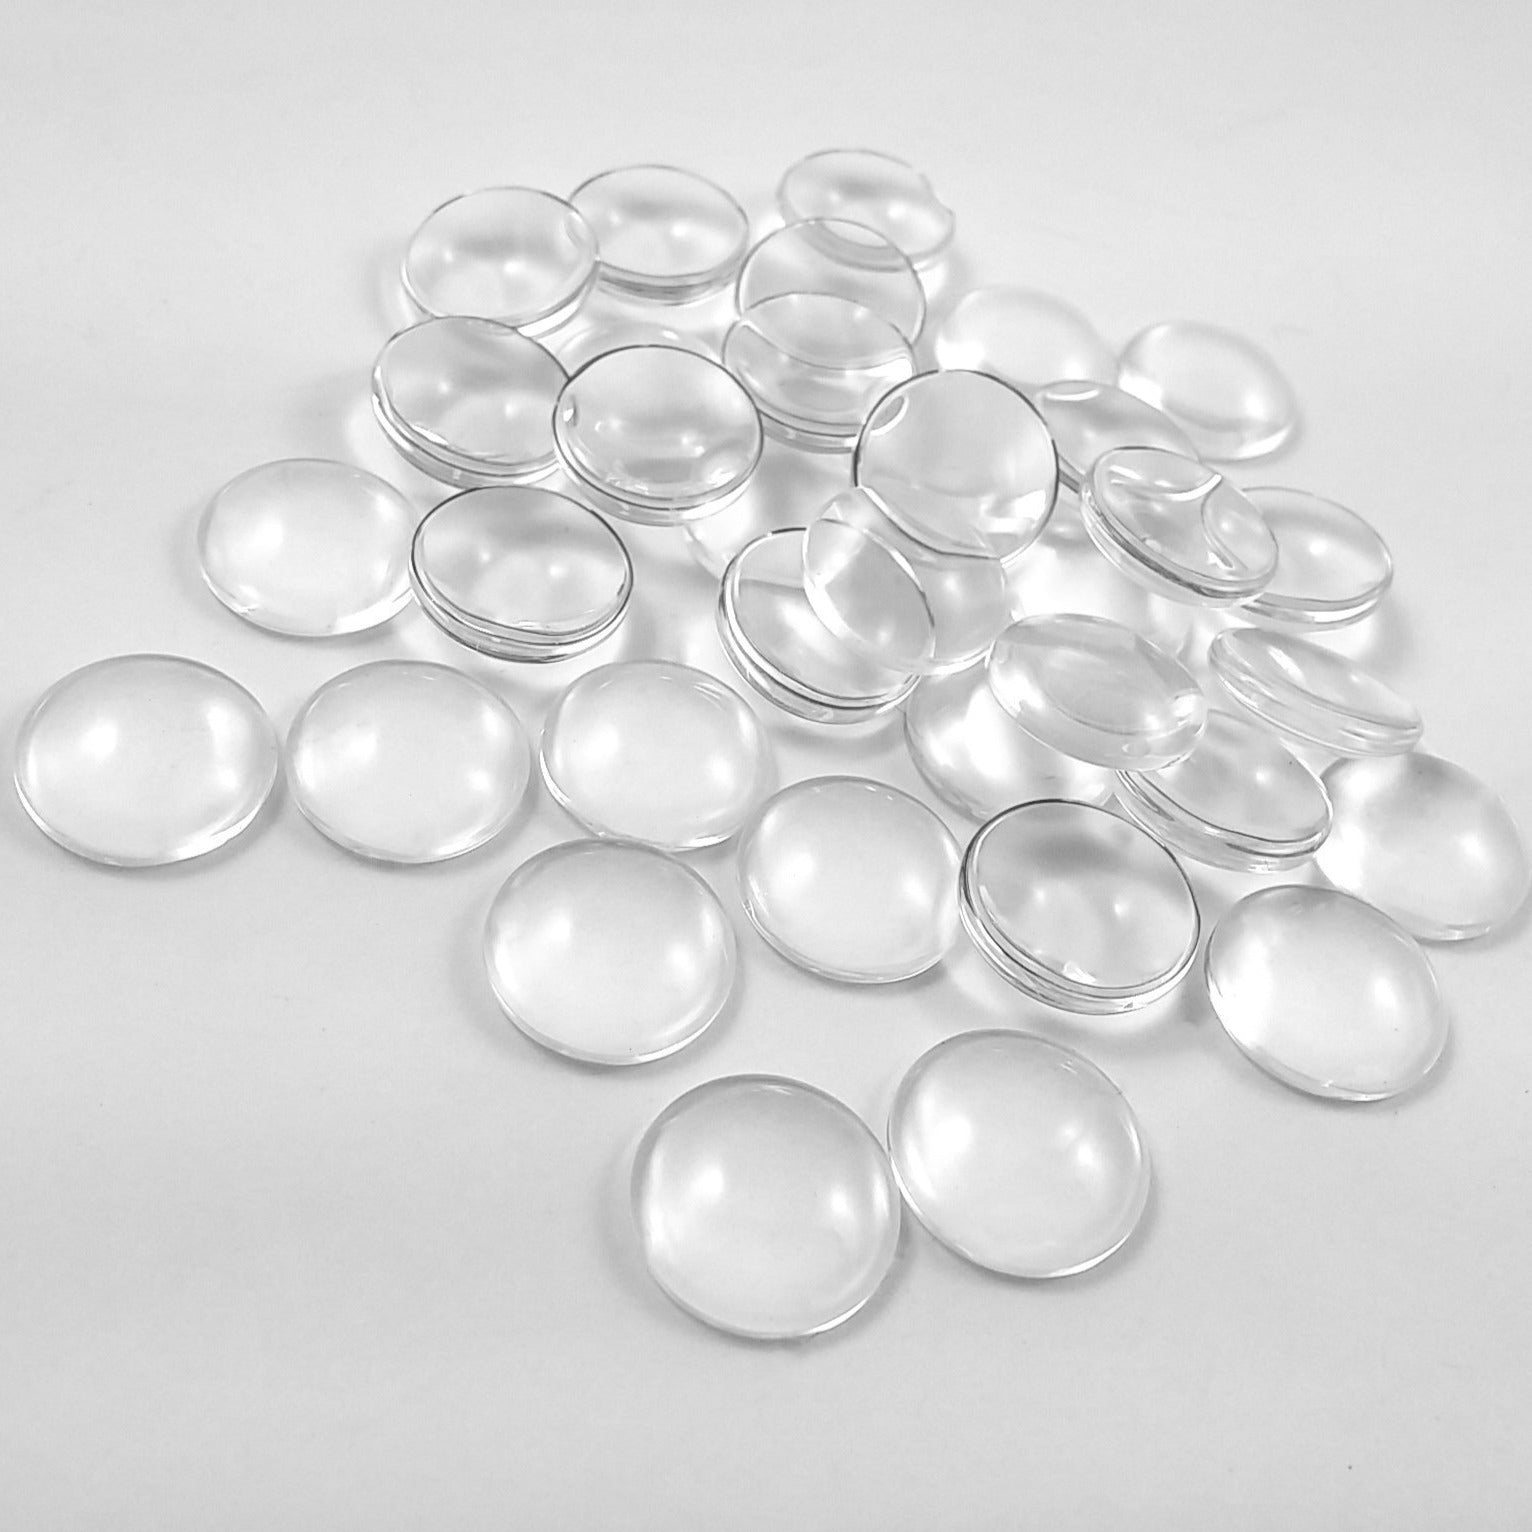 10 Flat Round Clear Glass Cabochons 8, 10, 12, 14, 16, 18 or 20mm